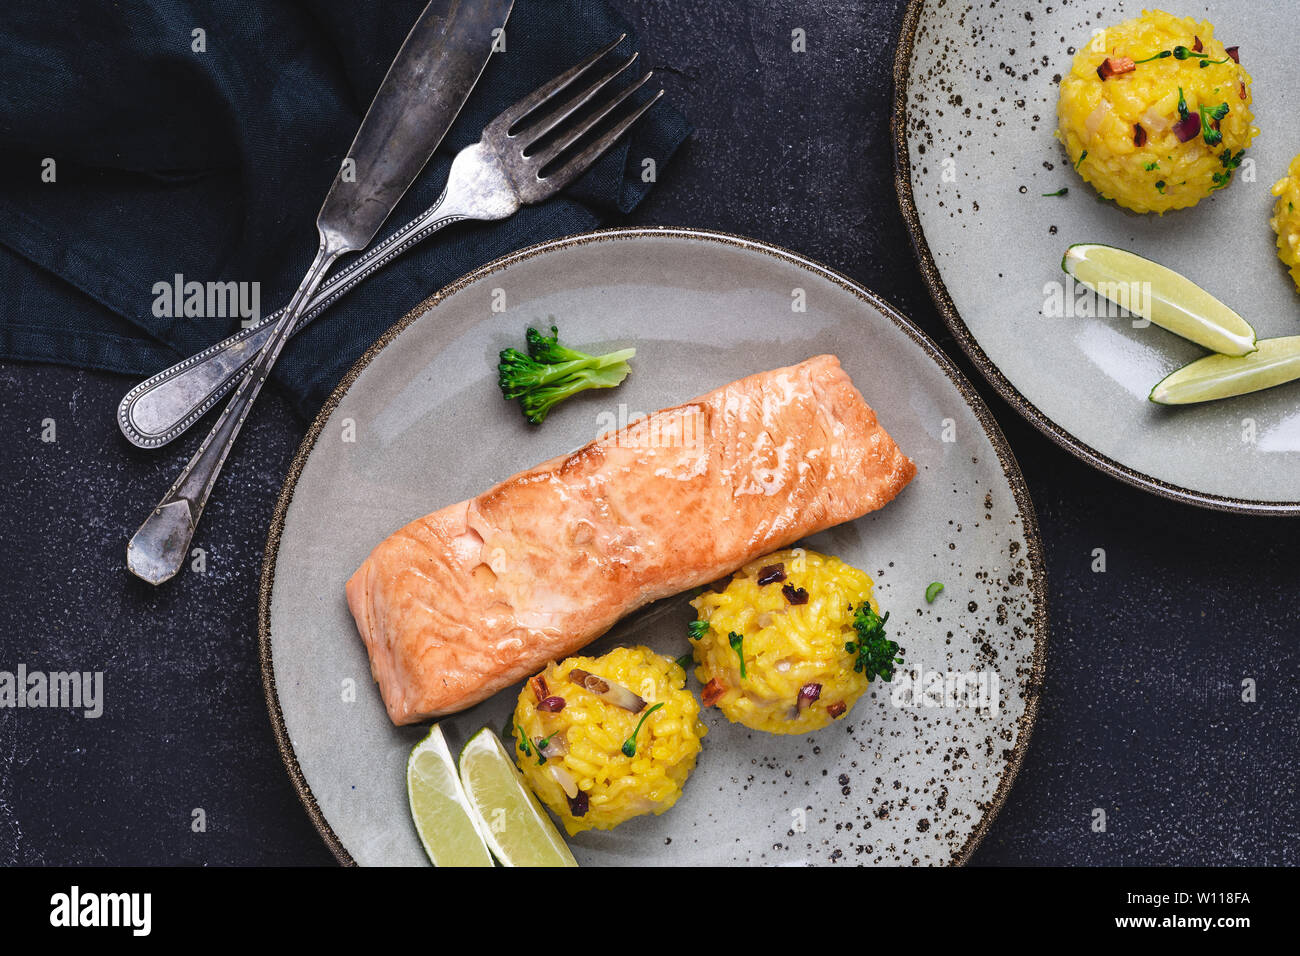 Grilled Salmon Steak with Yellow Risotto and Lime on Stone Background. Healthy Eating Concept. Stock Photo